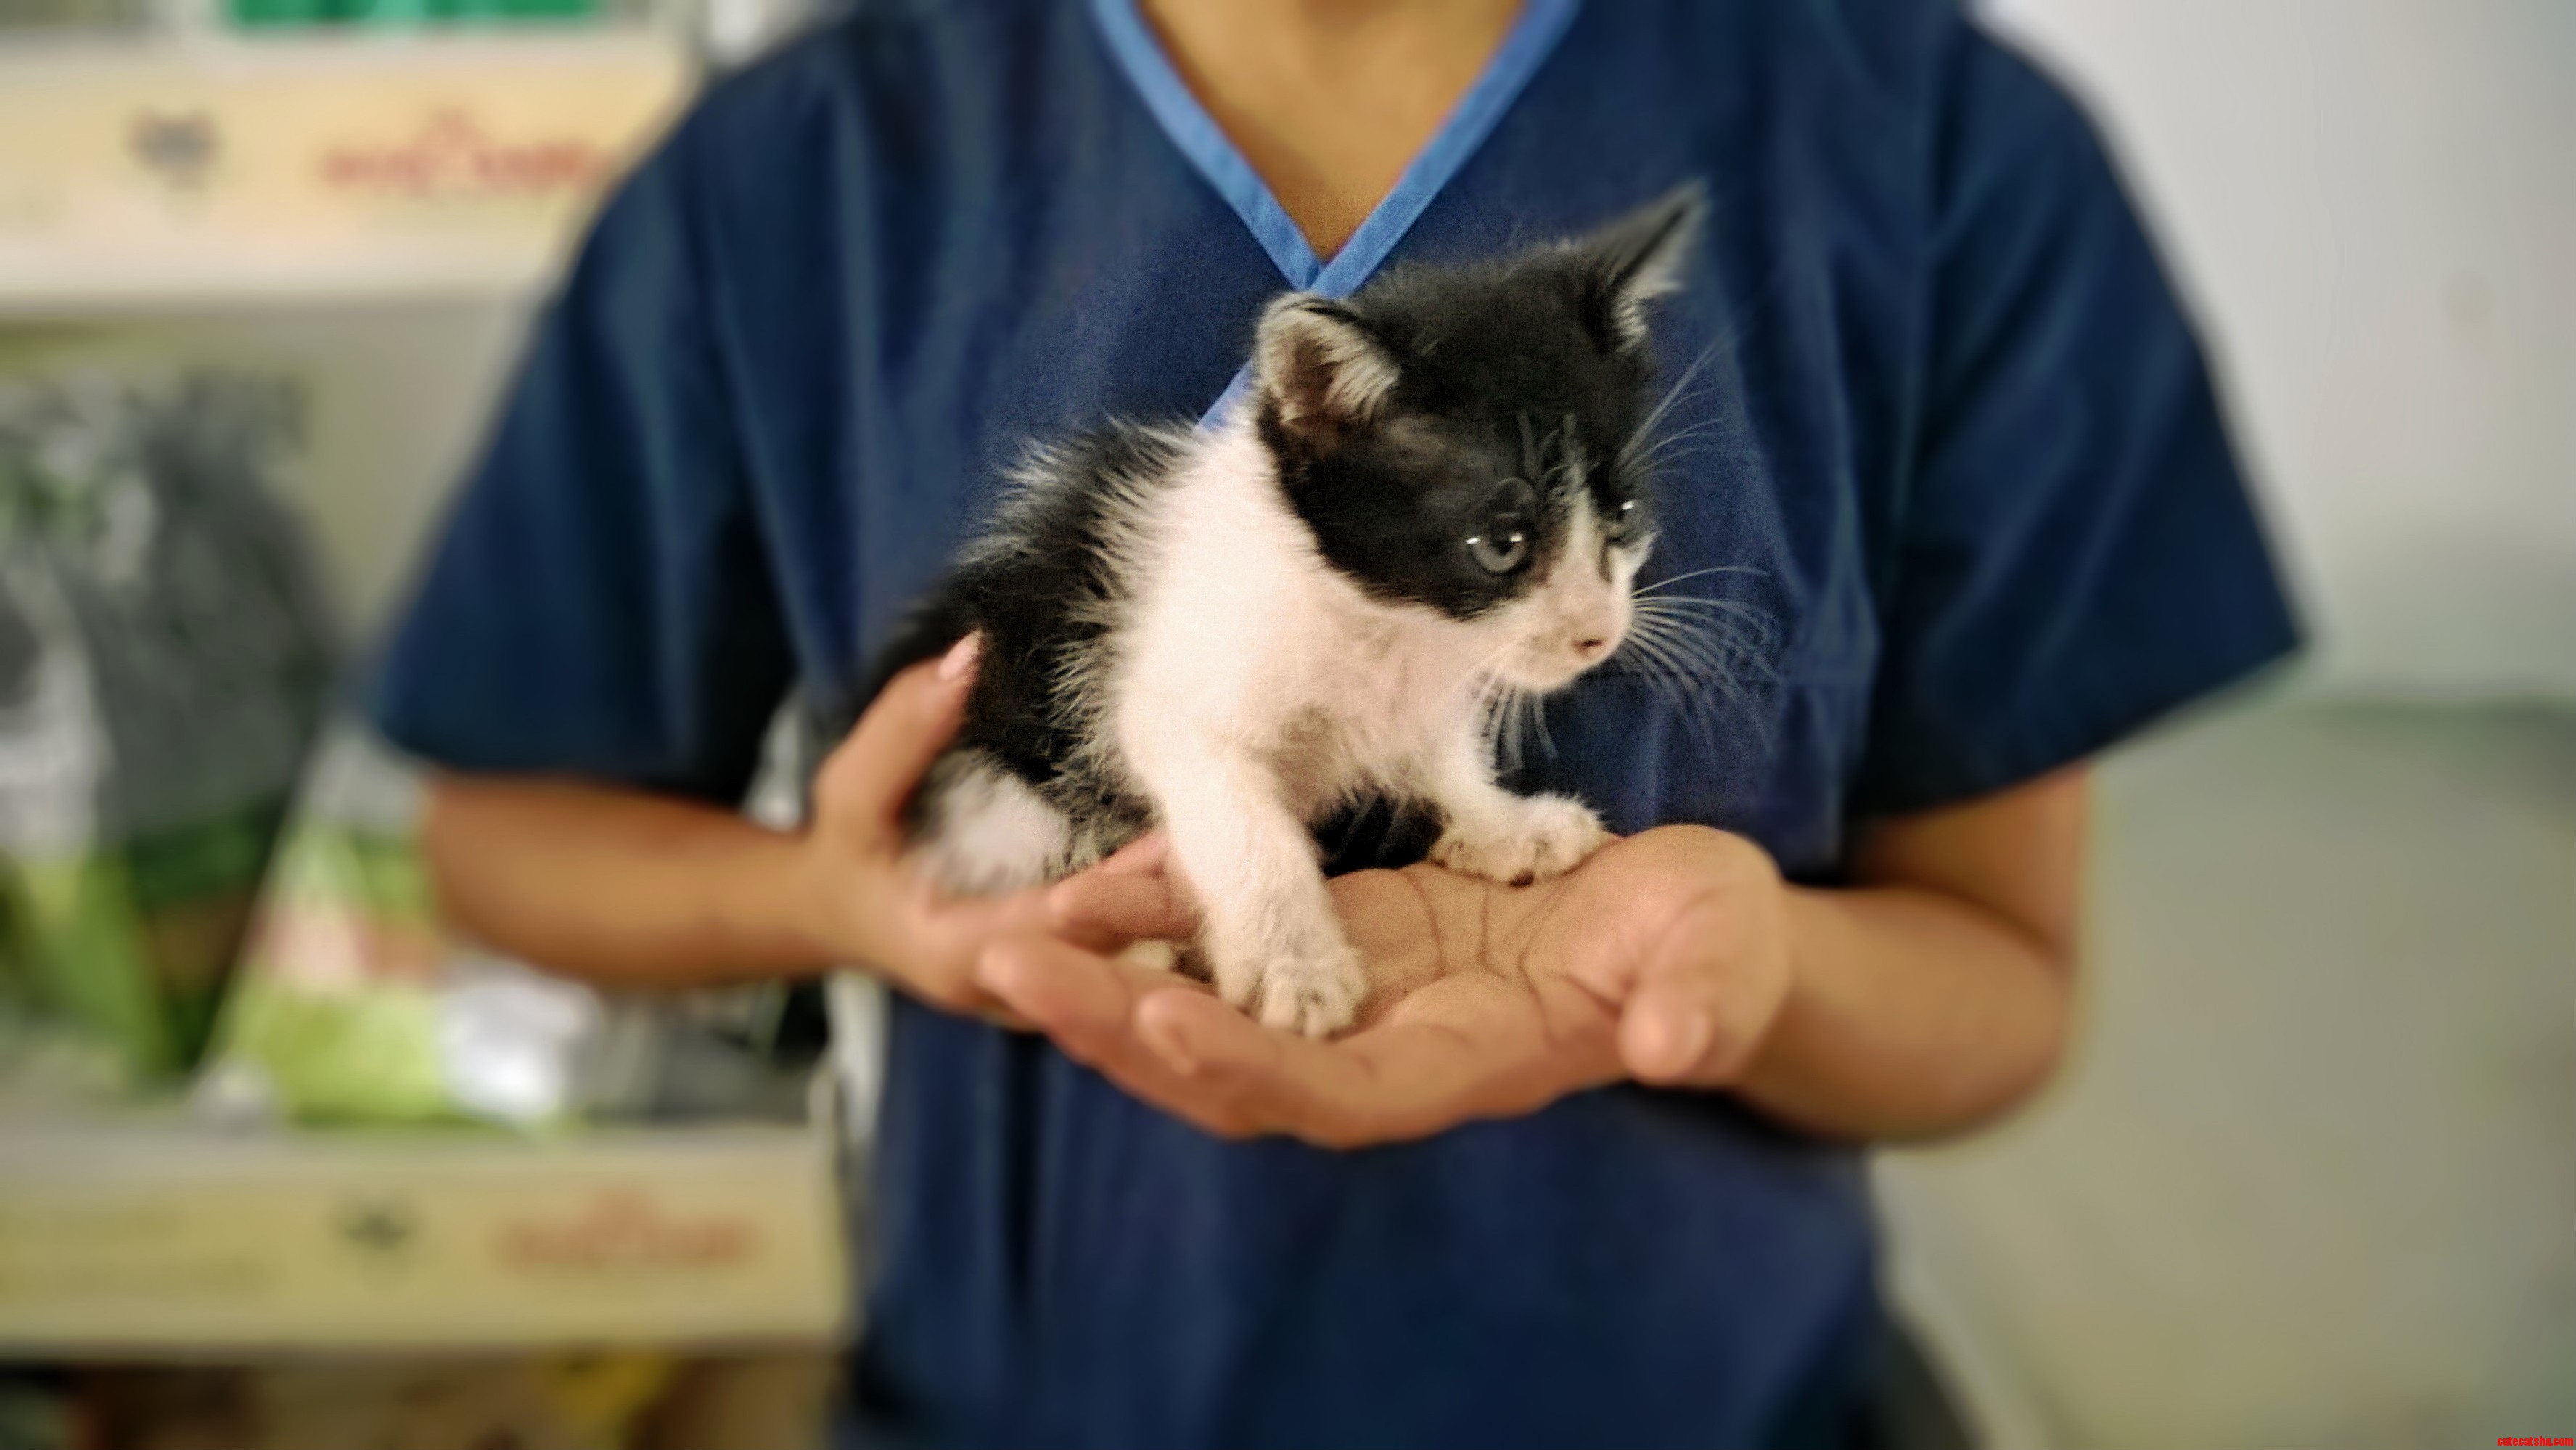 Met This Little Guy At The Vet Today